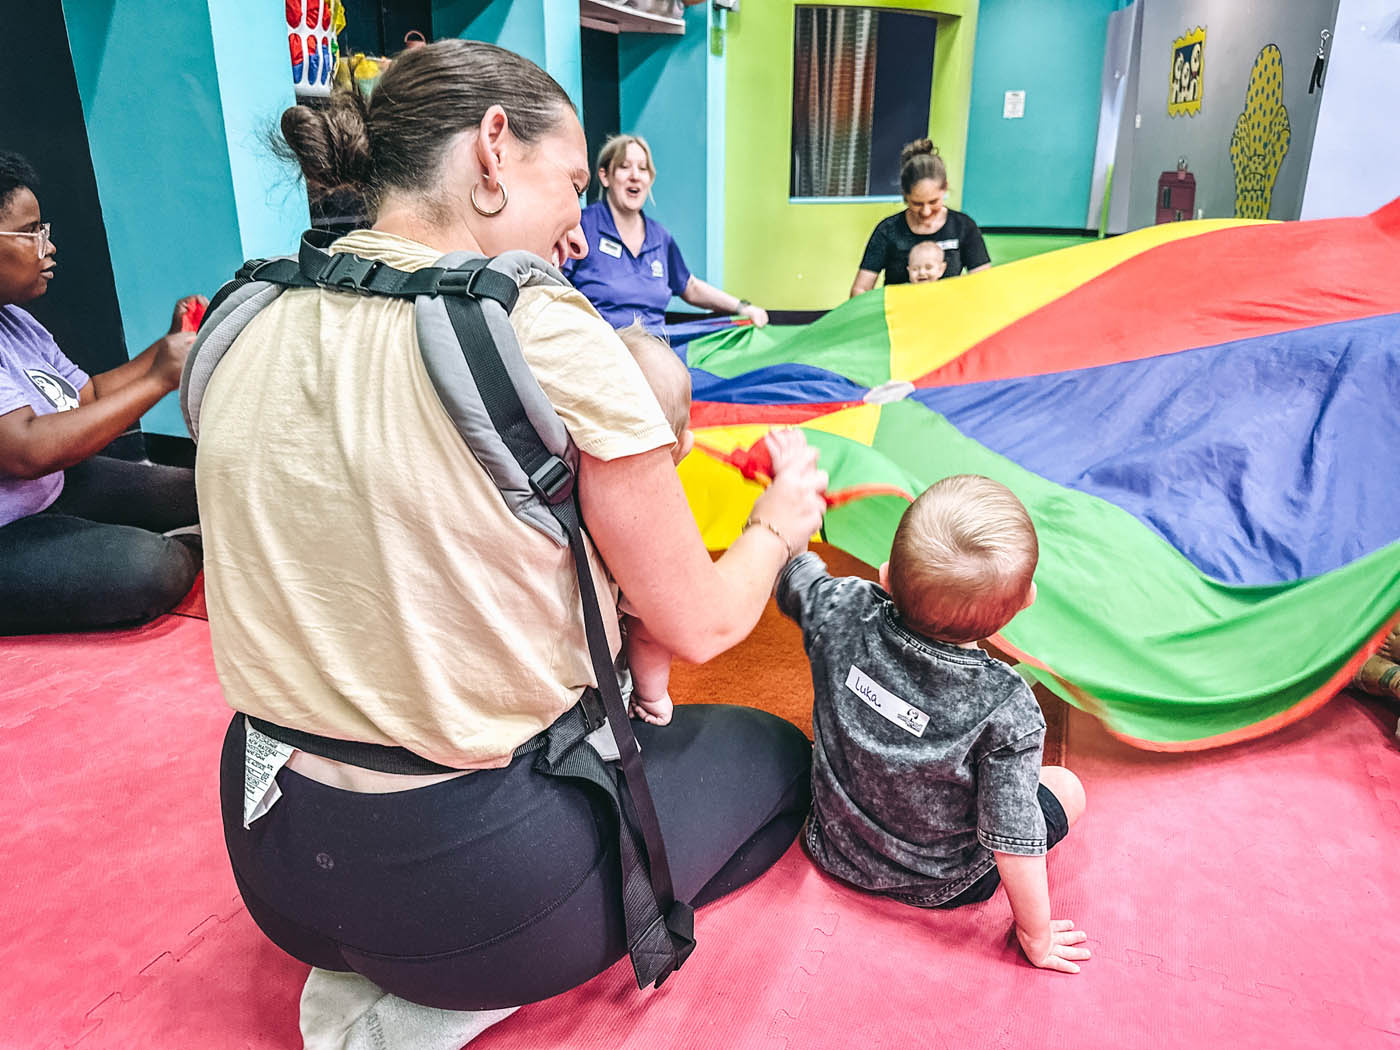 A group of small children with an instructor learning and playing together in a socialization class for kids in Wethersfield, CT.